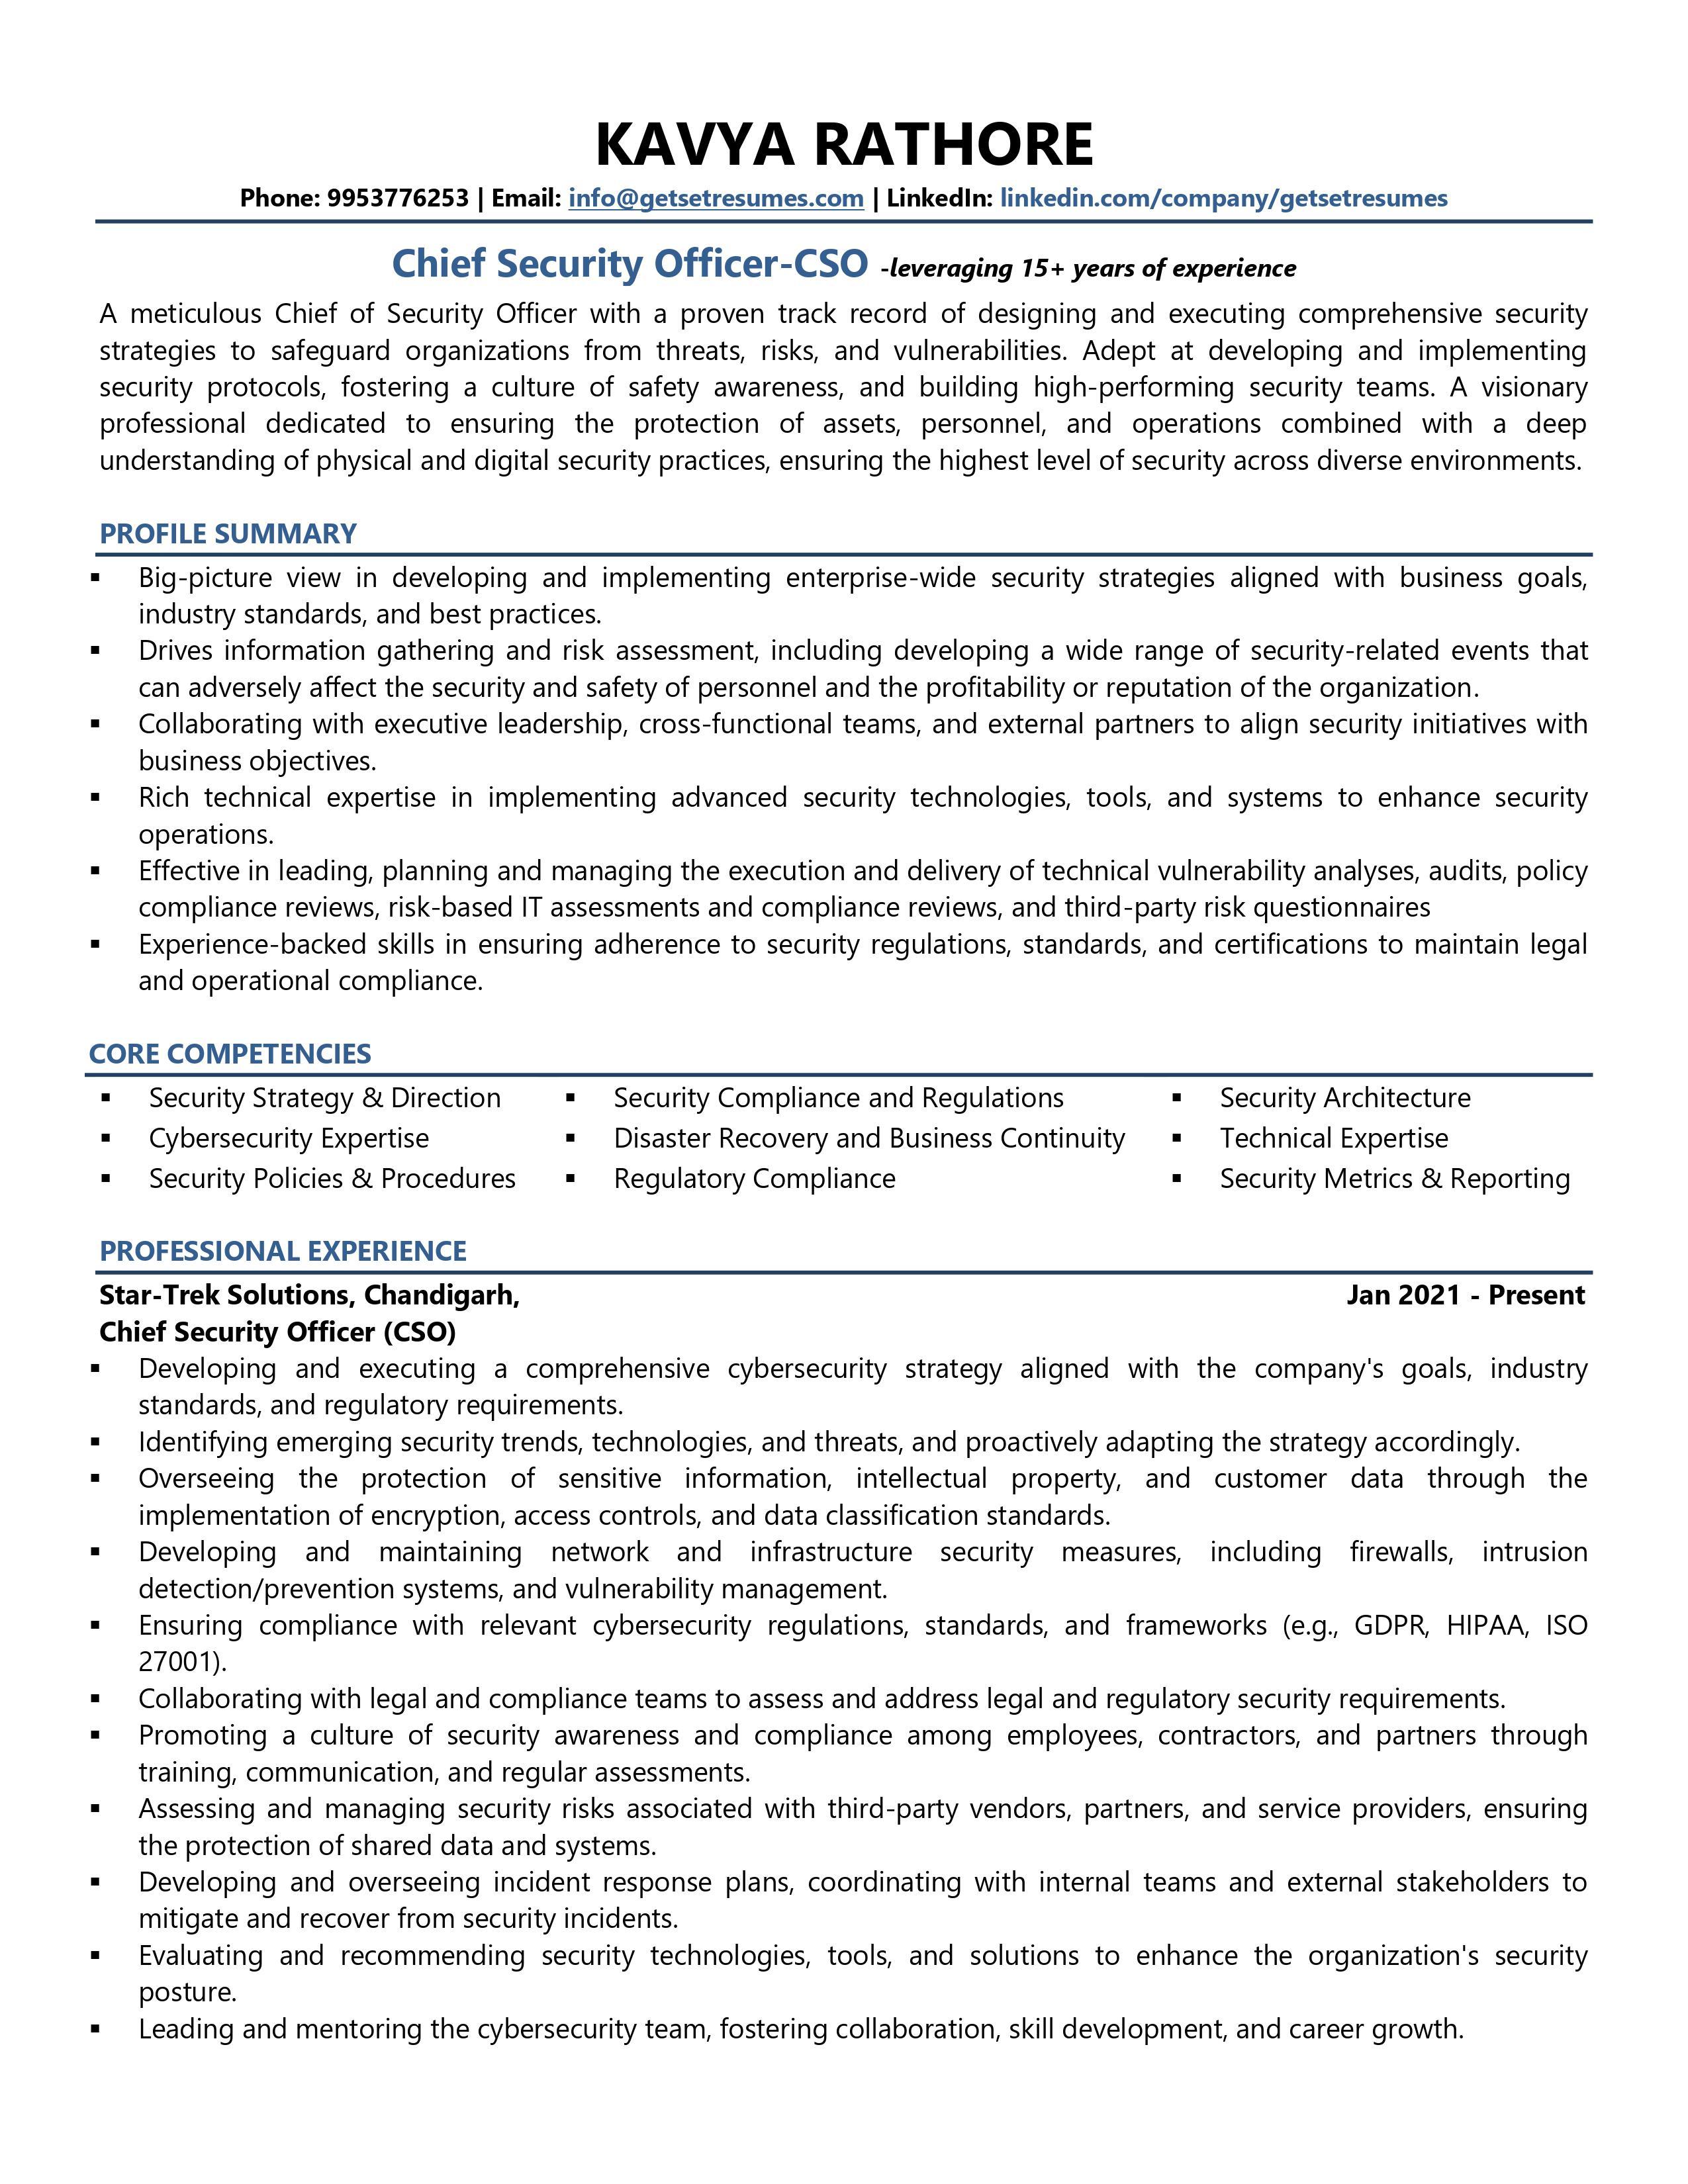 Chief Security Officer - Resume Example & Template